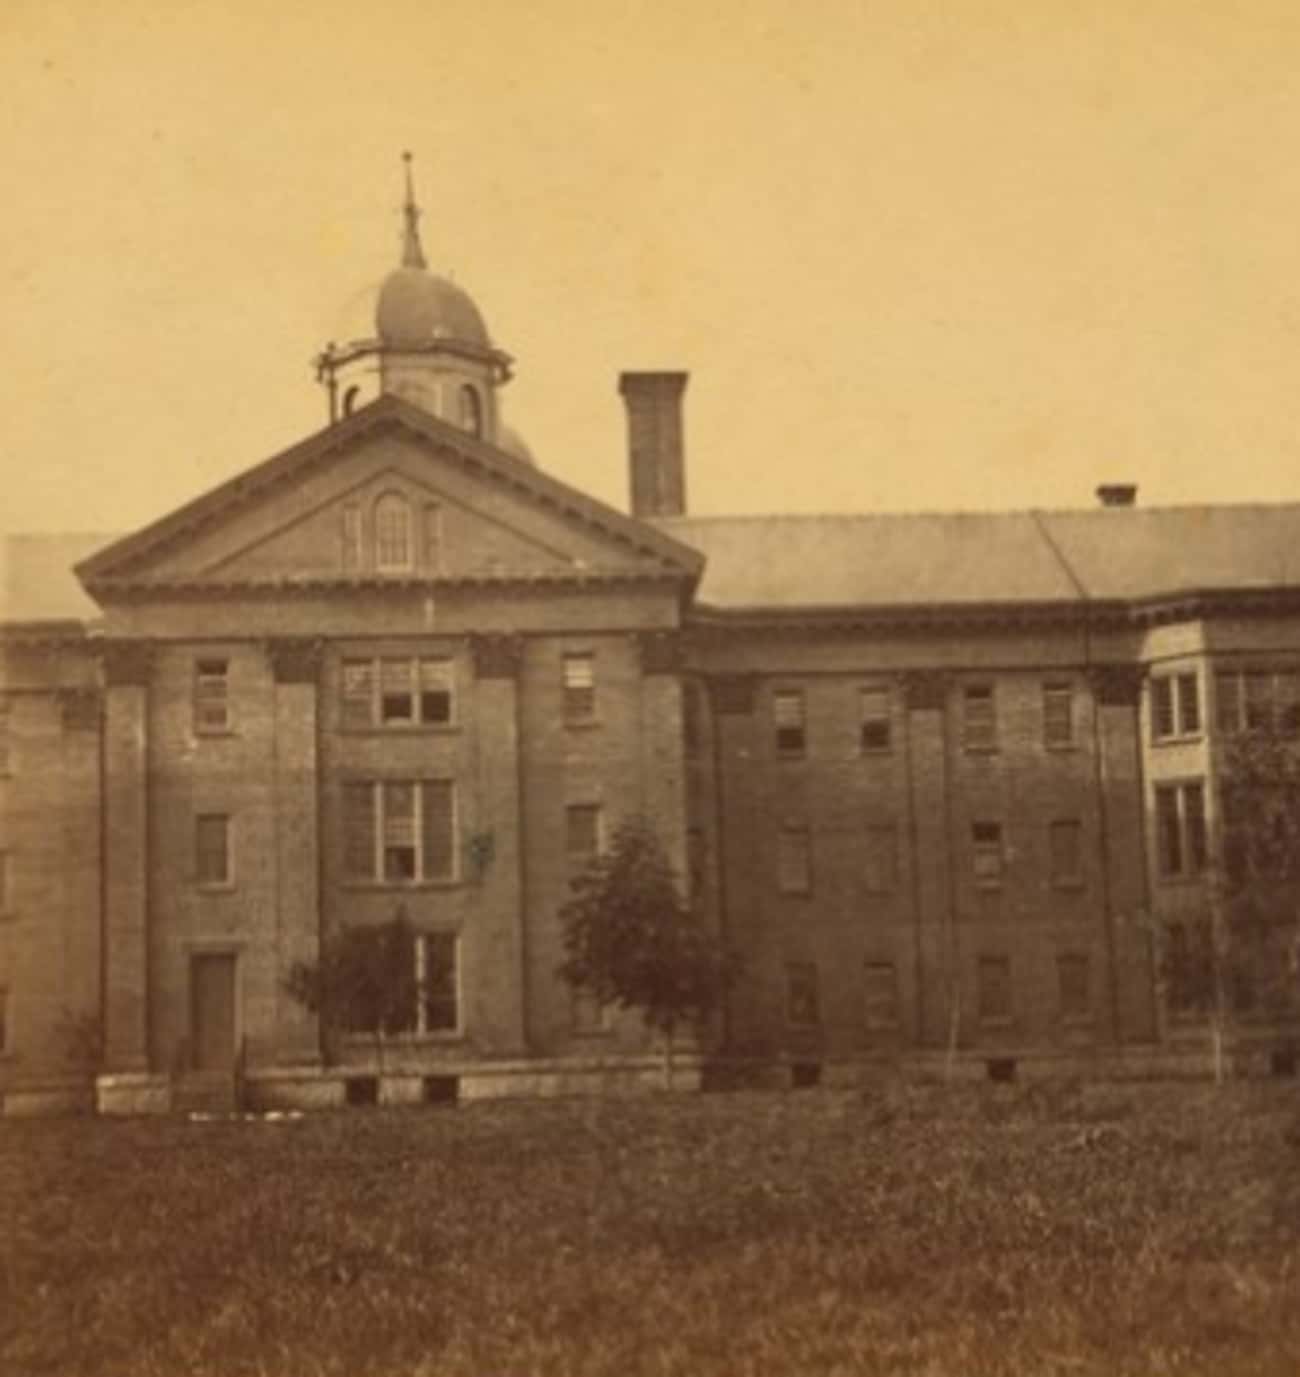 Ironically, The Asylum Was Built To Be A More Humane Treatment Facility